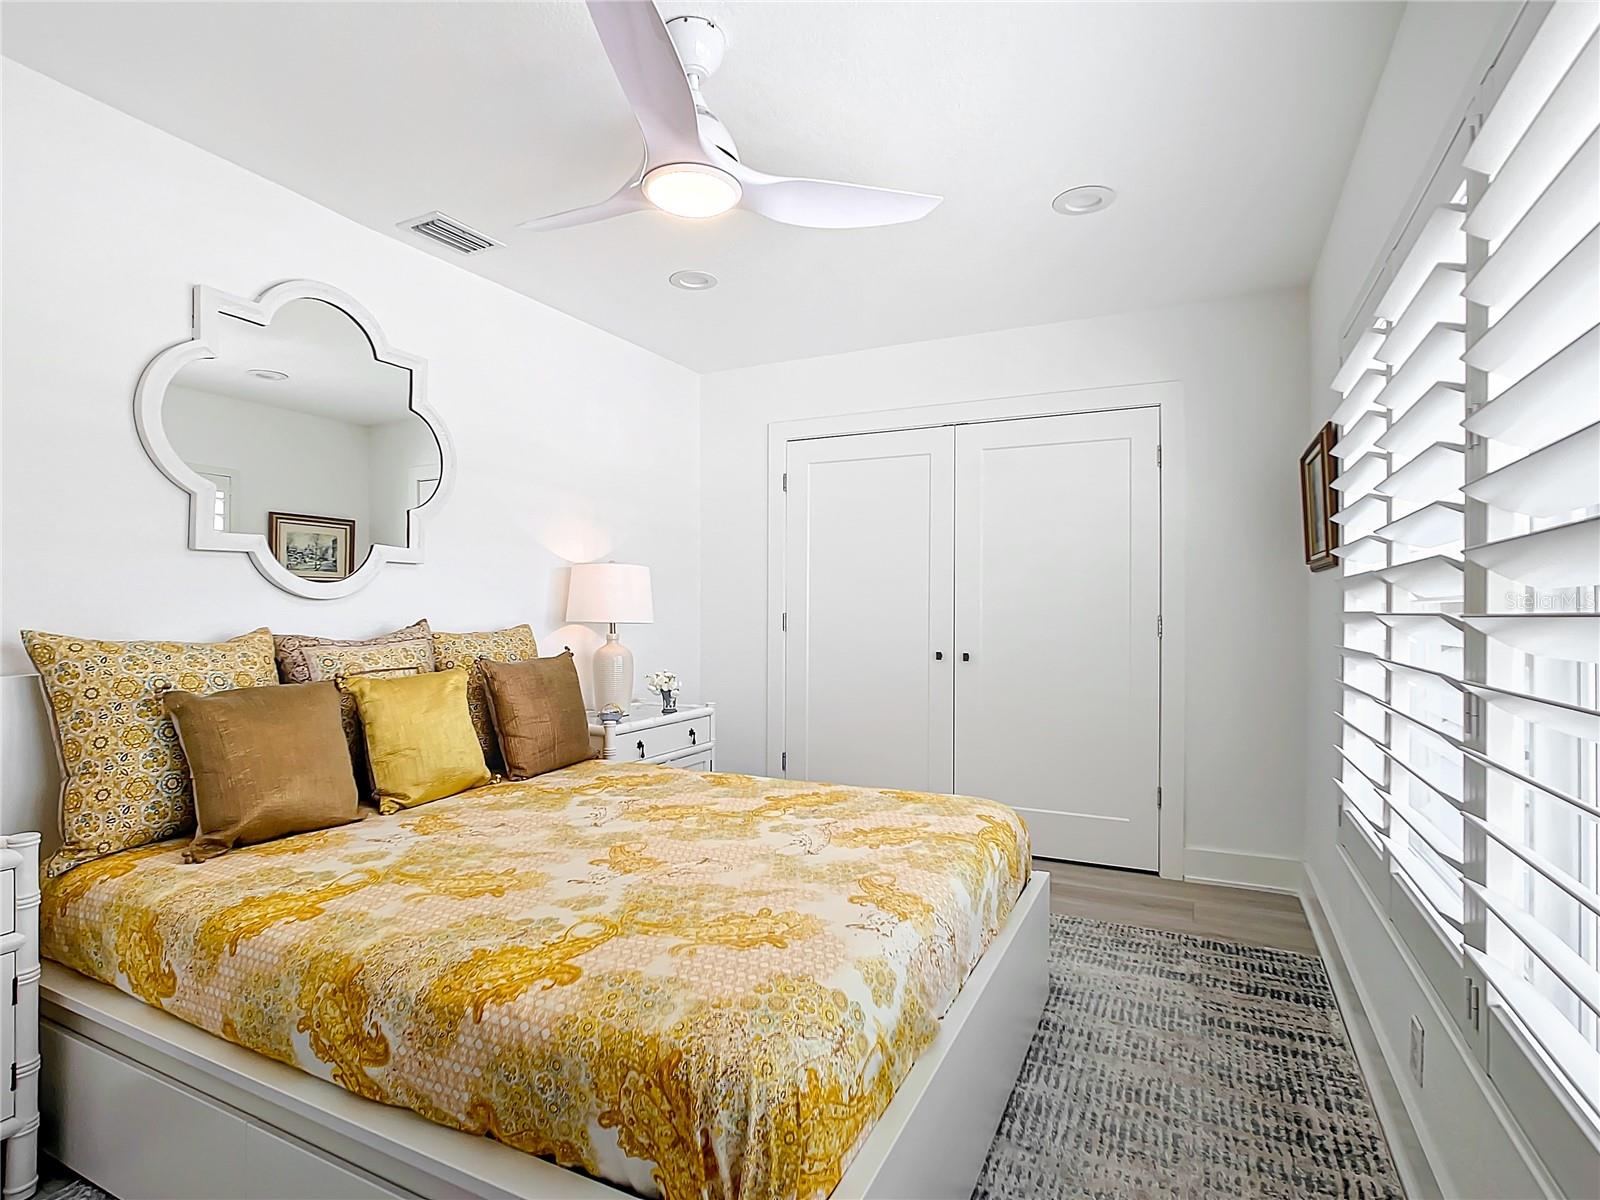 2nd bedroom, conveniently located at the front of the home, offers plantation shutters and a built-in closet with organizers.